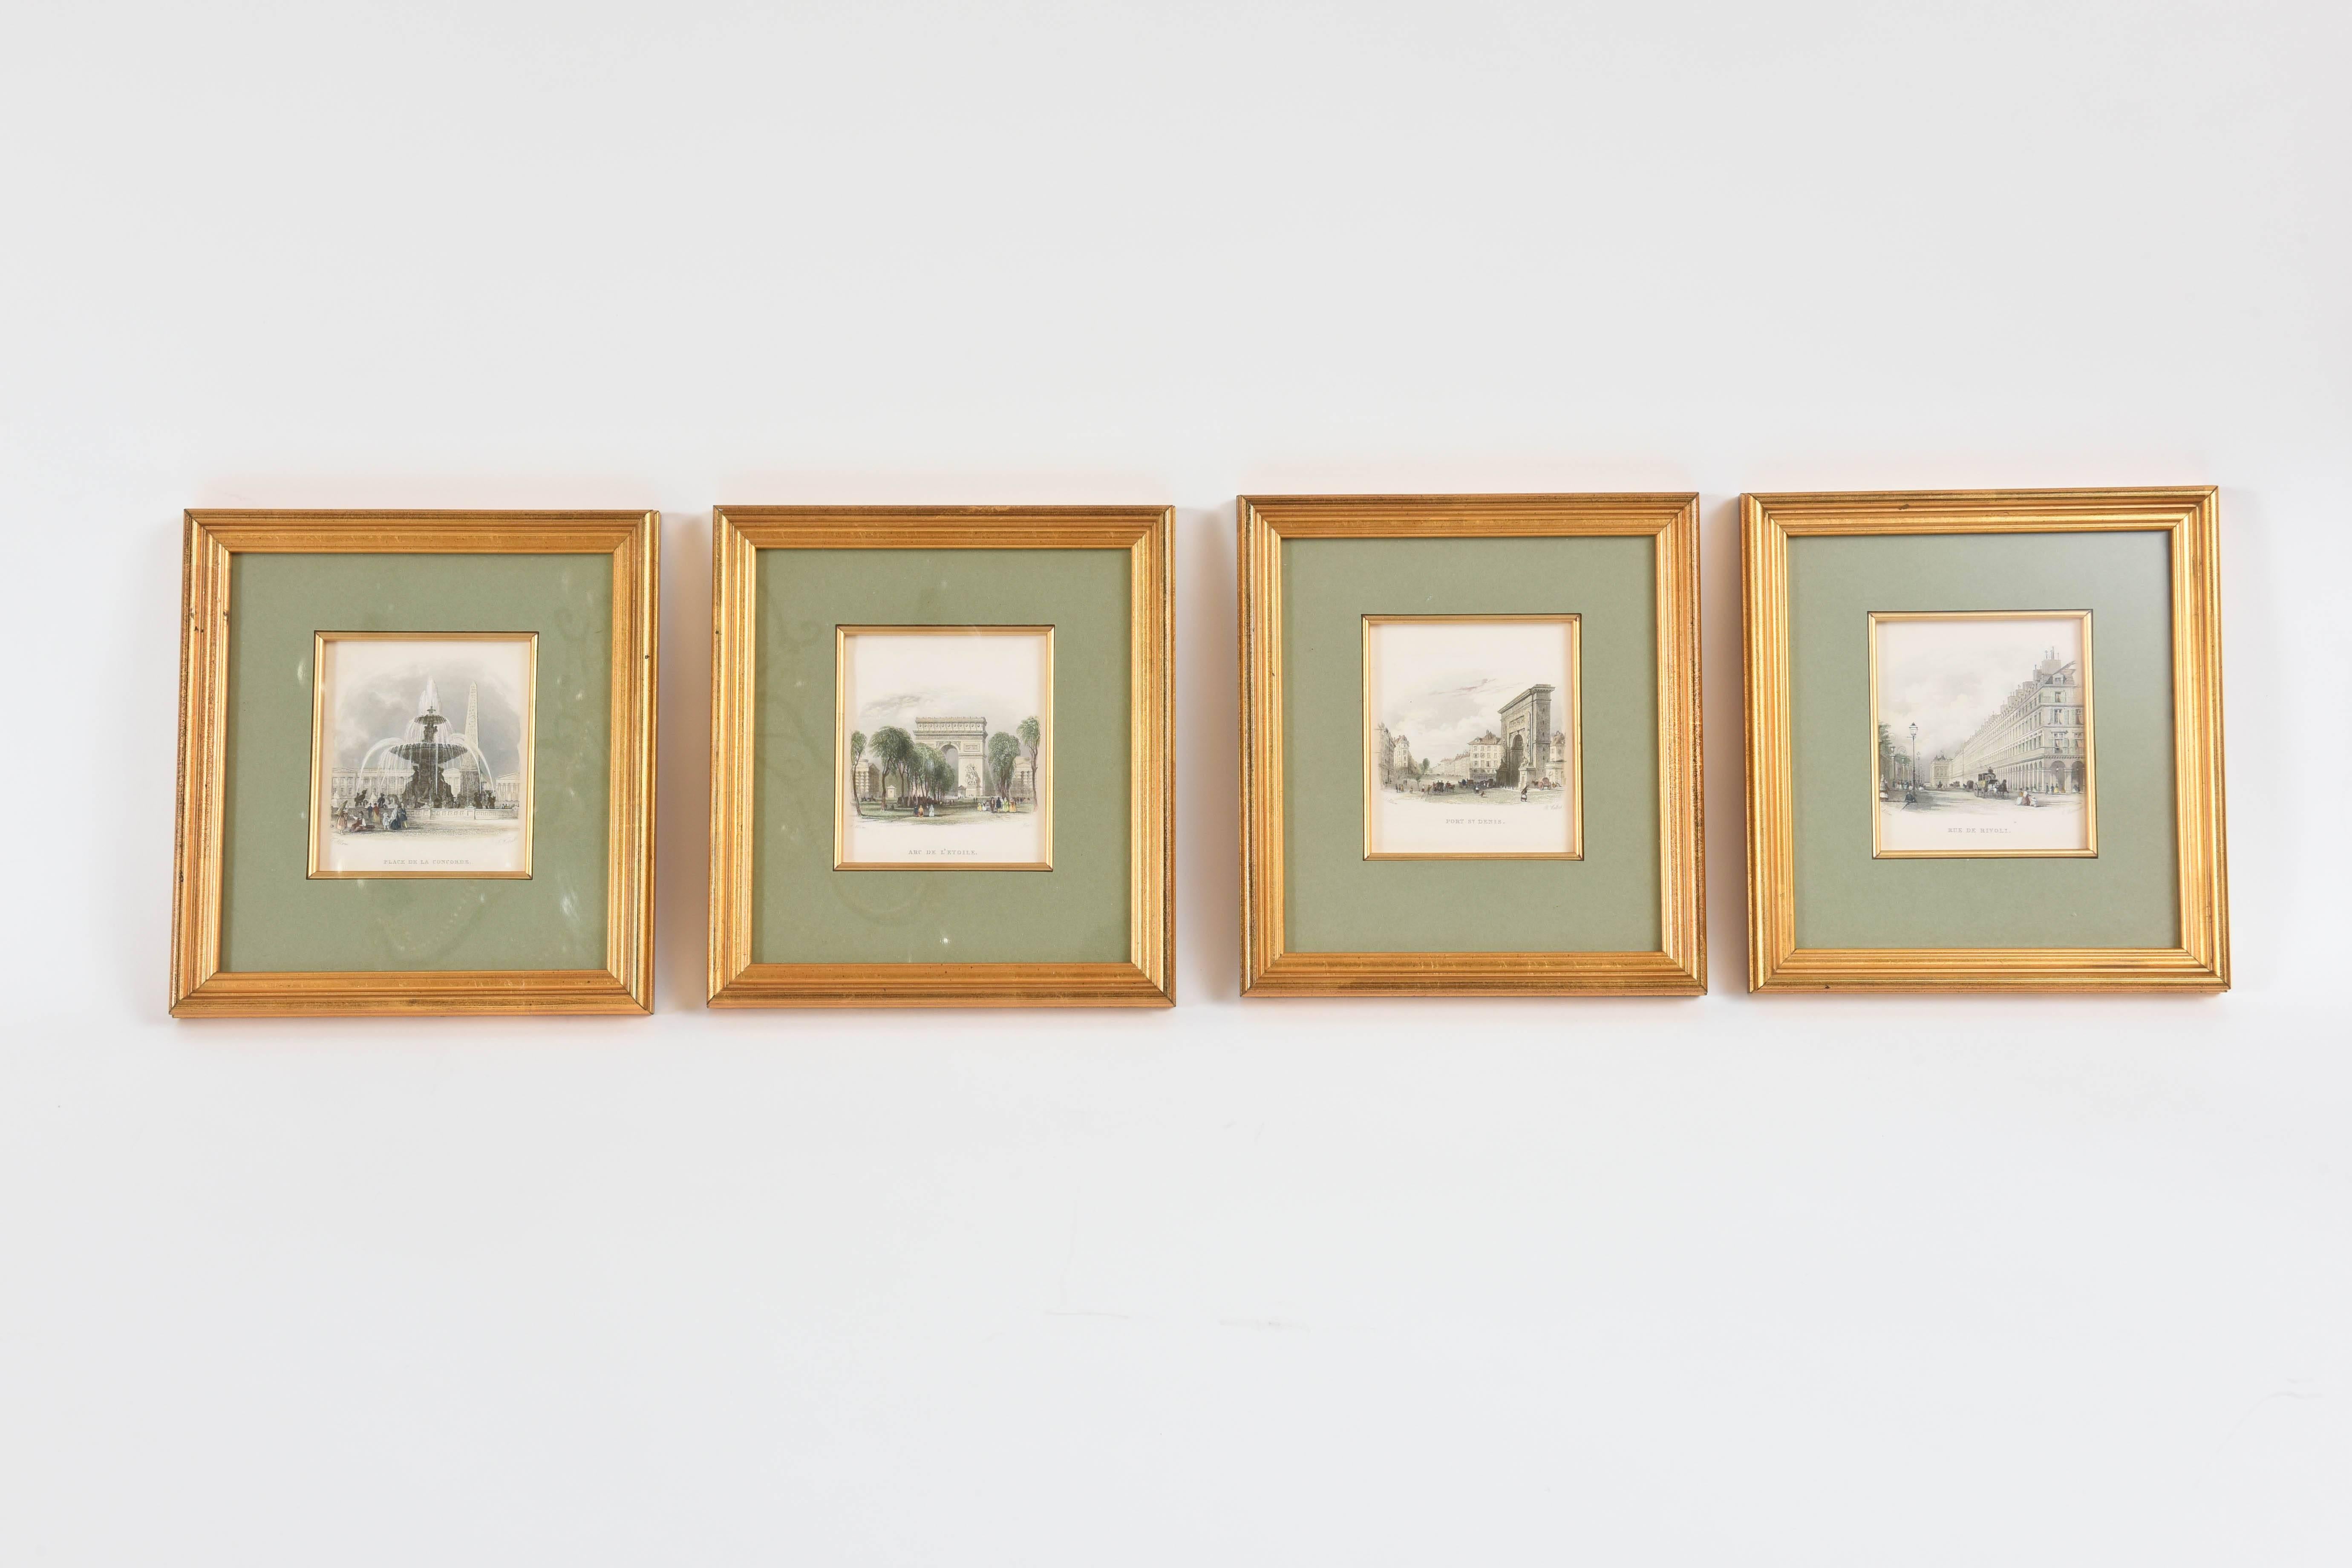 Framed in quality wood frames with a gorgeous shade of soft green matting, these hand color engravings of Paris, all by Thomas Allom, comprising: (One) Rue de Rivoli, (one) Port St. Denis, (one) The Tuileries, (one) Place de Concorde, (one) Place